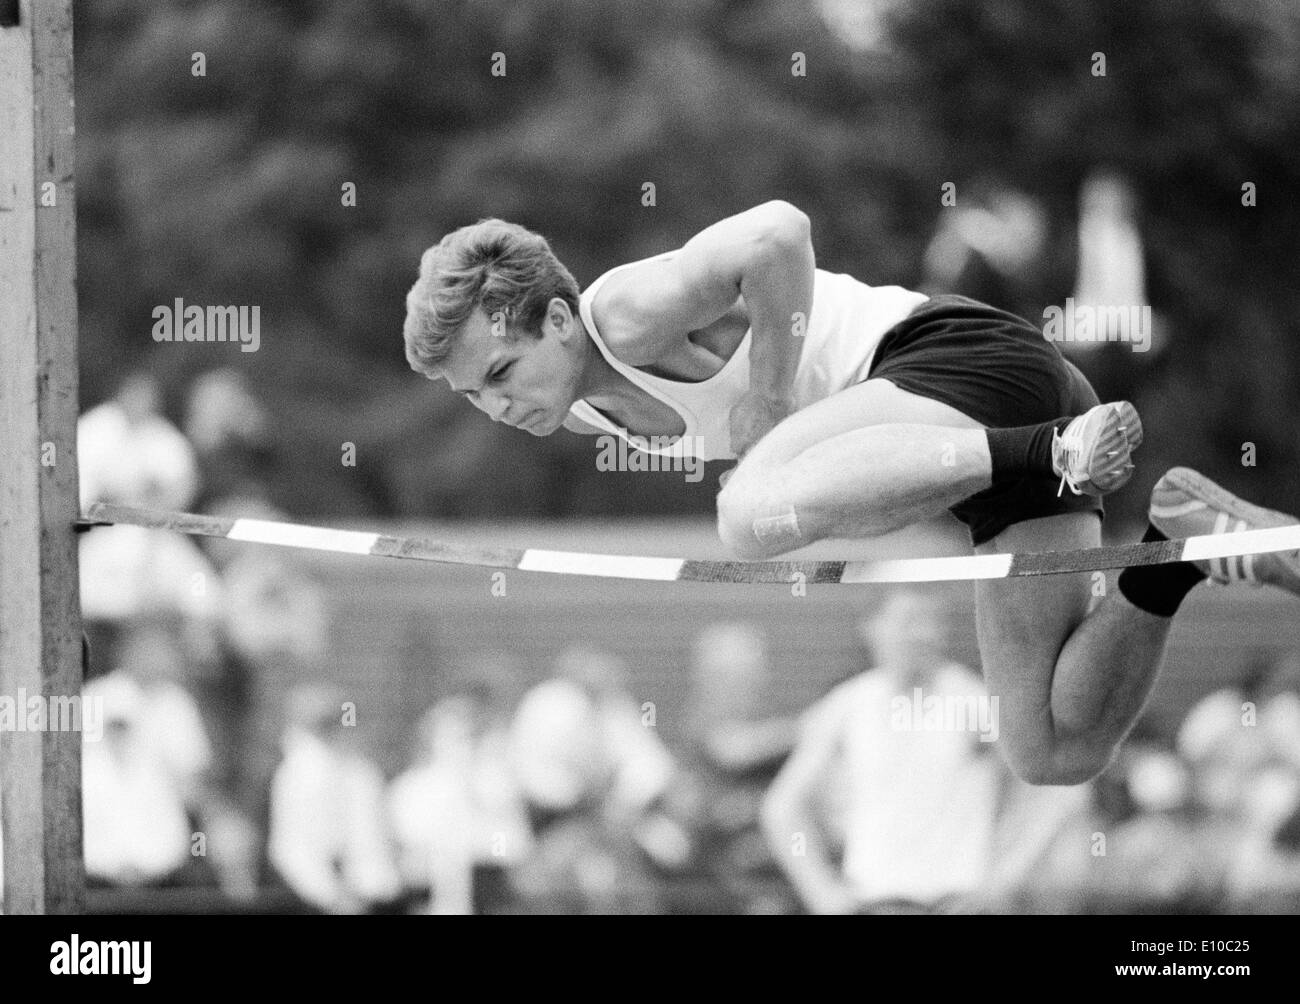 Sixties, black and white photo, sports, athletics, Competition in Athletics 1966 of the Vest Recklinghausen in the Jahn Stadium in Bottrop, high jump, men, high jumper, D-Bottrop, Ruhr area, North Rhine-Westphalia Stock Photo